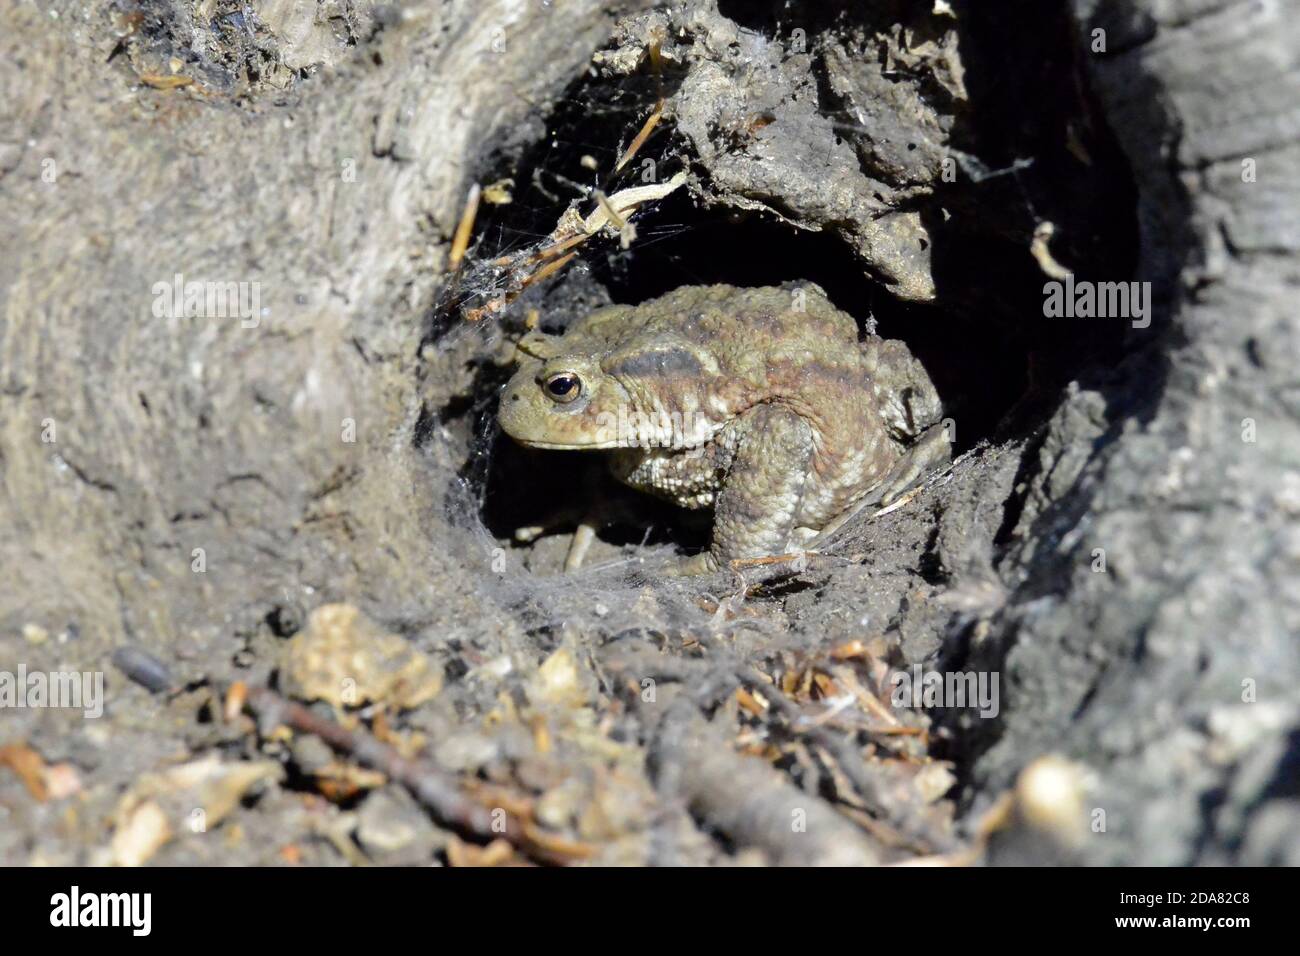 Common toad hiding in a tree stump Stock Photo